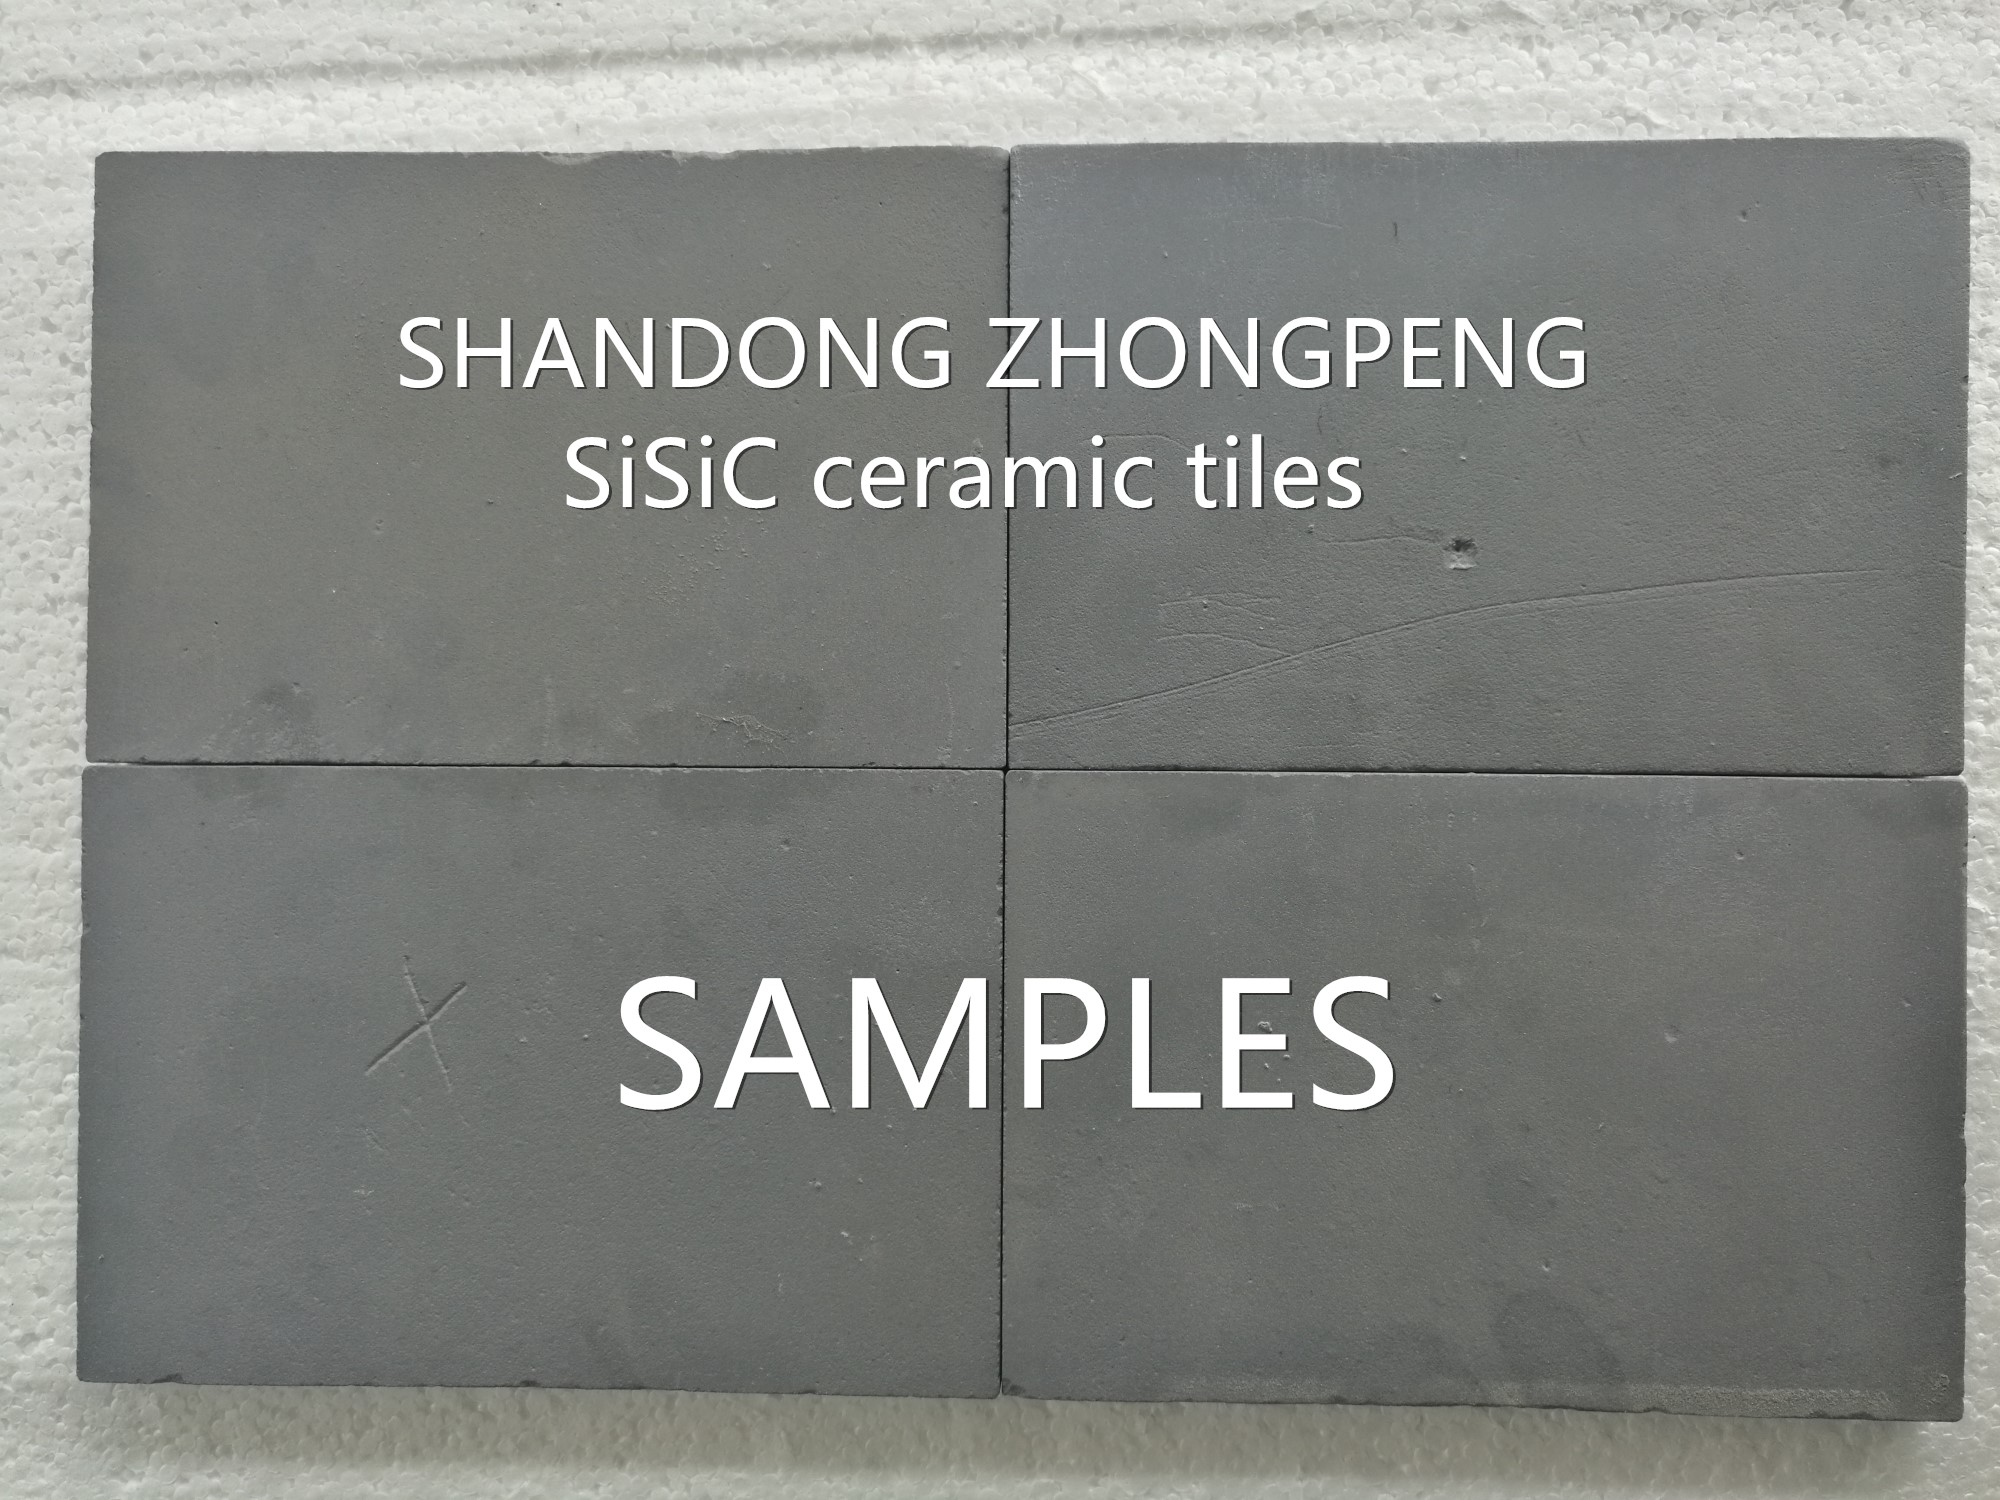 Special Design for Mig Welding Nozzle -
 Silicon carbide ceramic tiles 150*100*25mm, 150*100*12mm, Ceramic Liner, tiles, plates, blocks, lining. – ZhongPeng